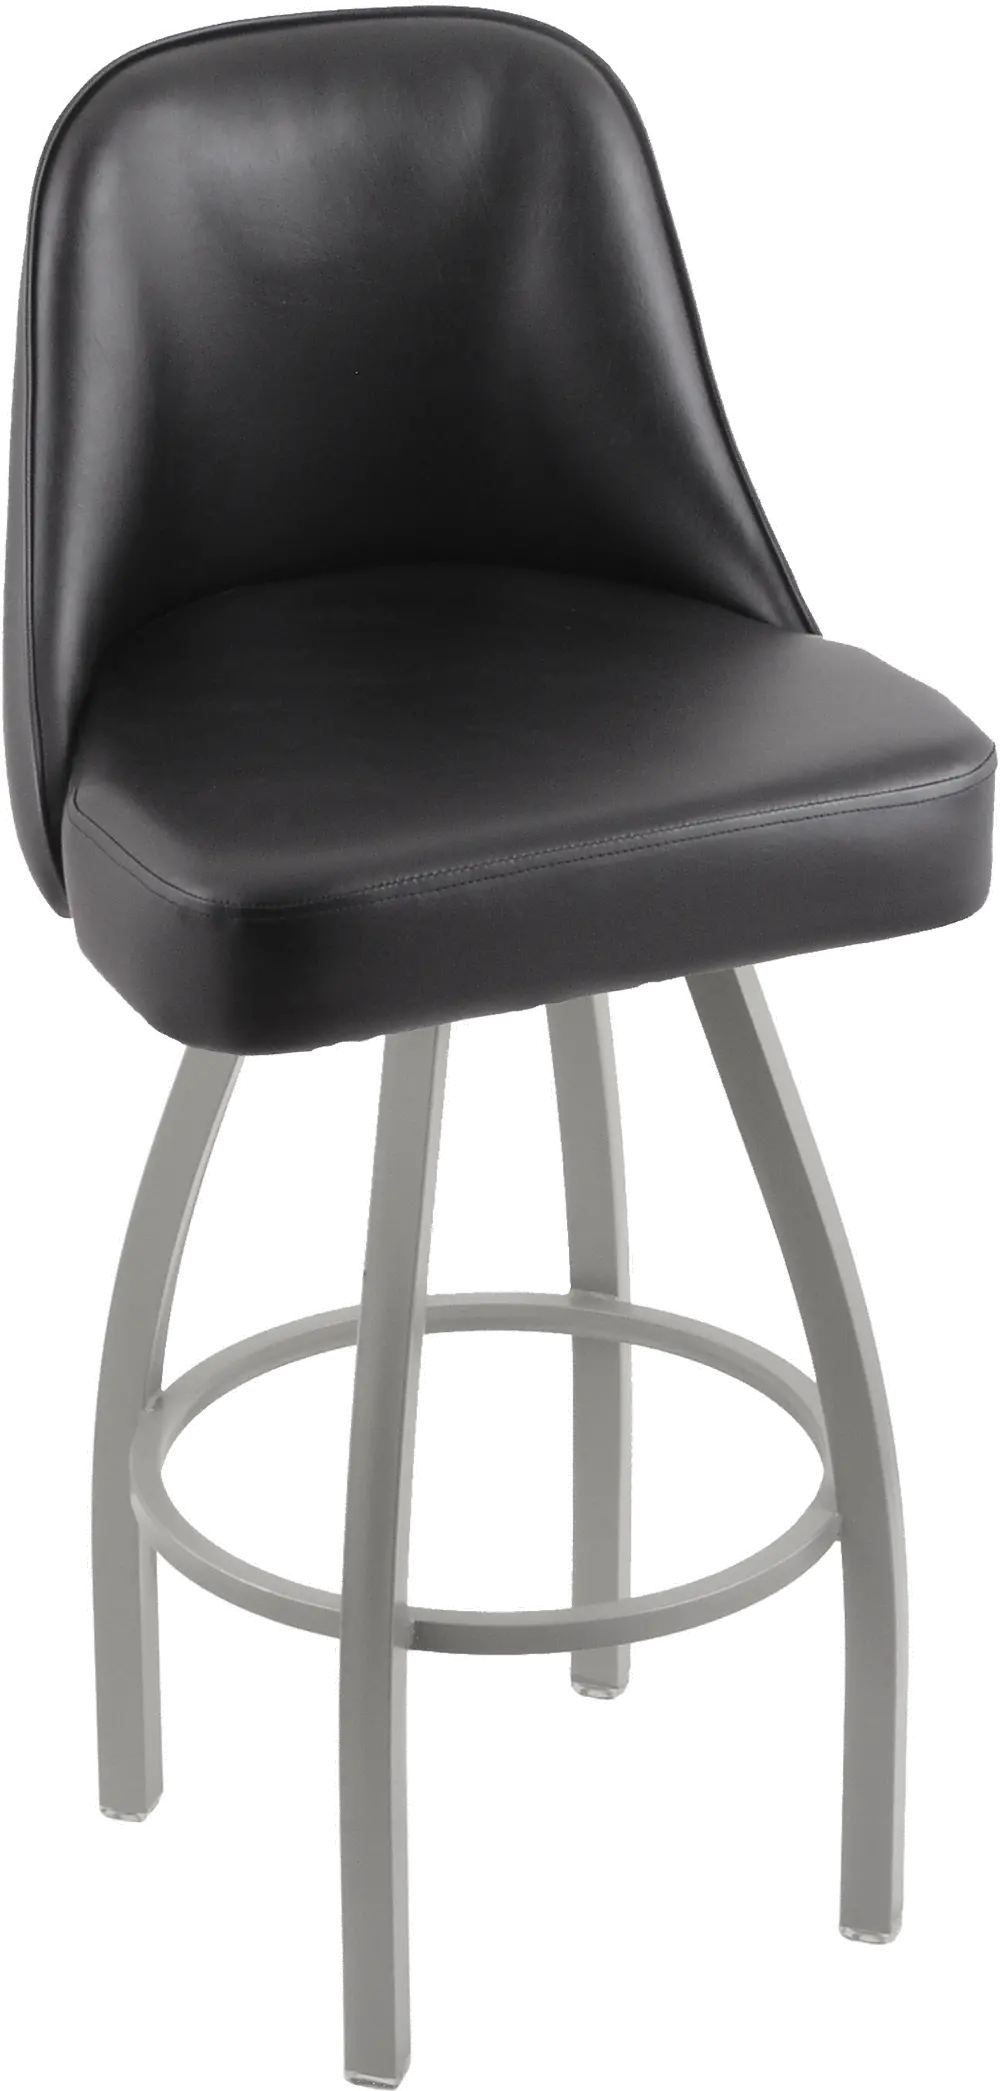 Grizzly Black Upholstered Swivel Bar Stool-1